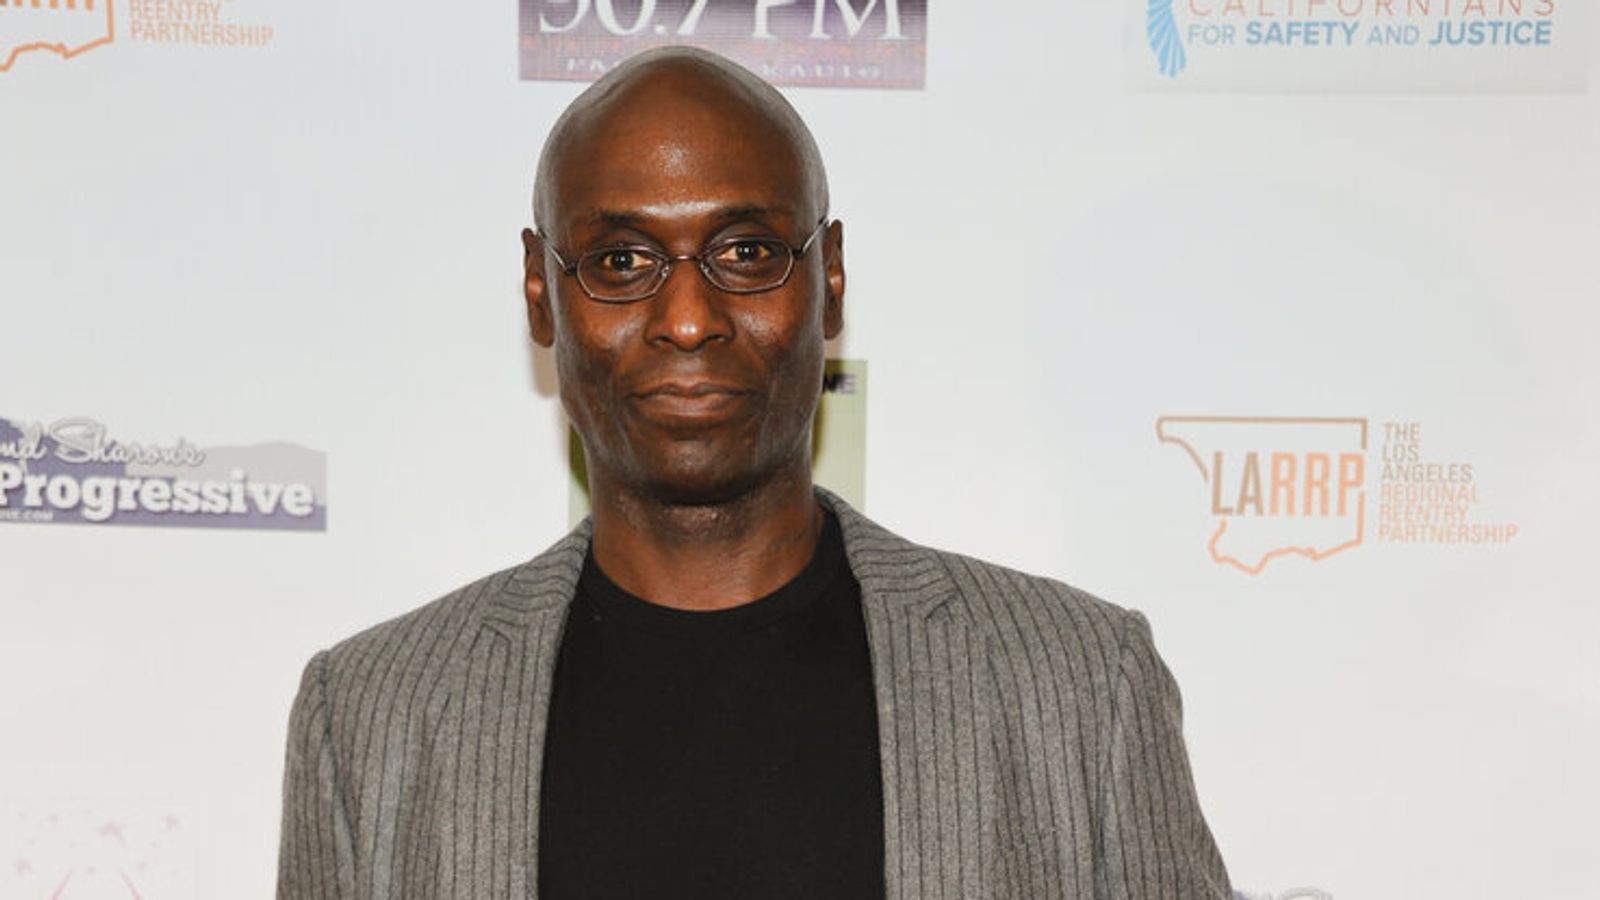 Lance Reddick, star of The Wire, dead at 60